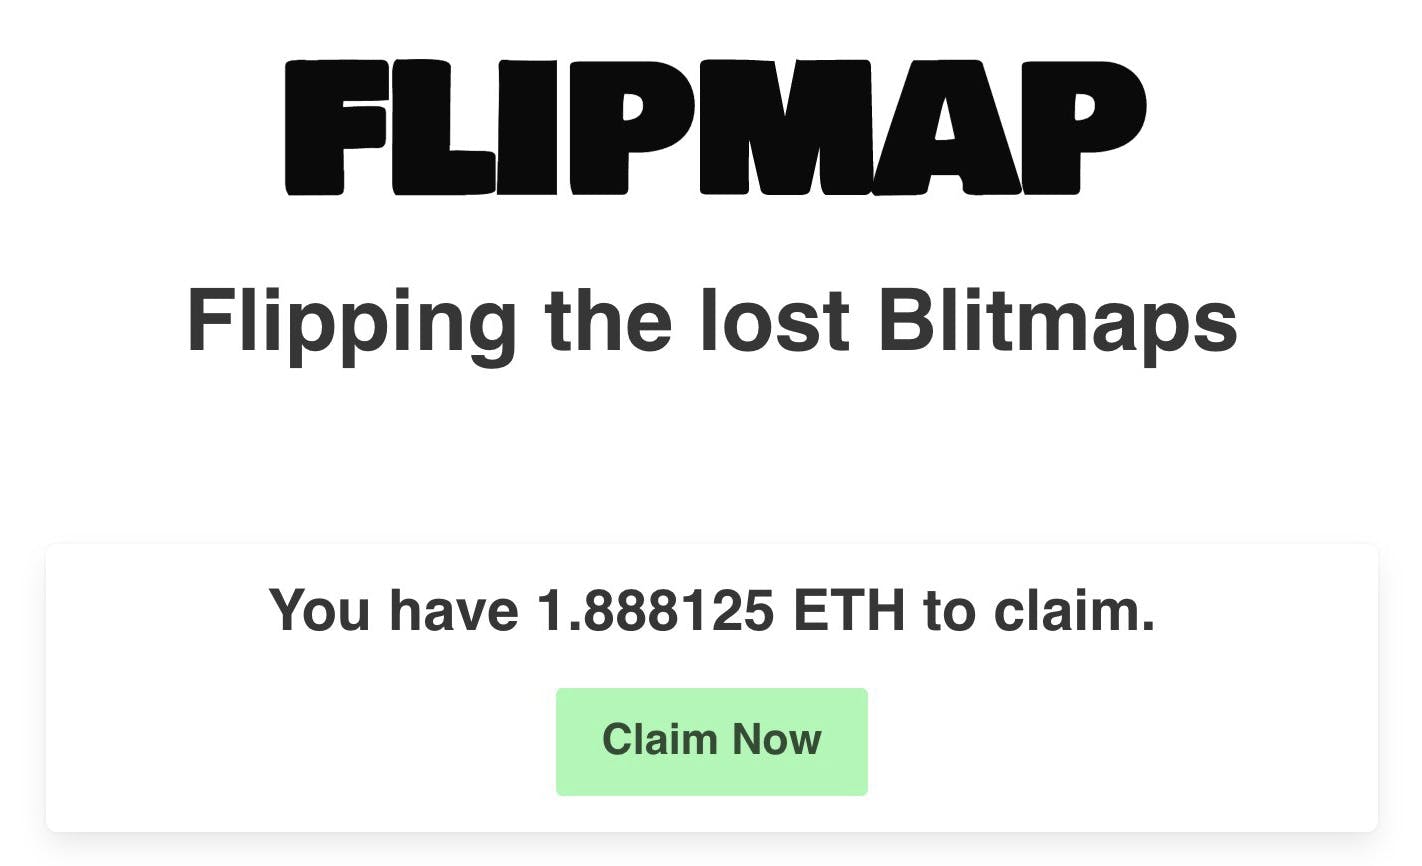 Even though CC0 allows the use of the original Blitmap project commercially without any fees, the Flipmap team chose to build in a royalty system into their contract to automatically payout original Blitmap artists.